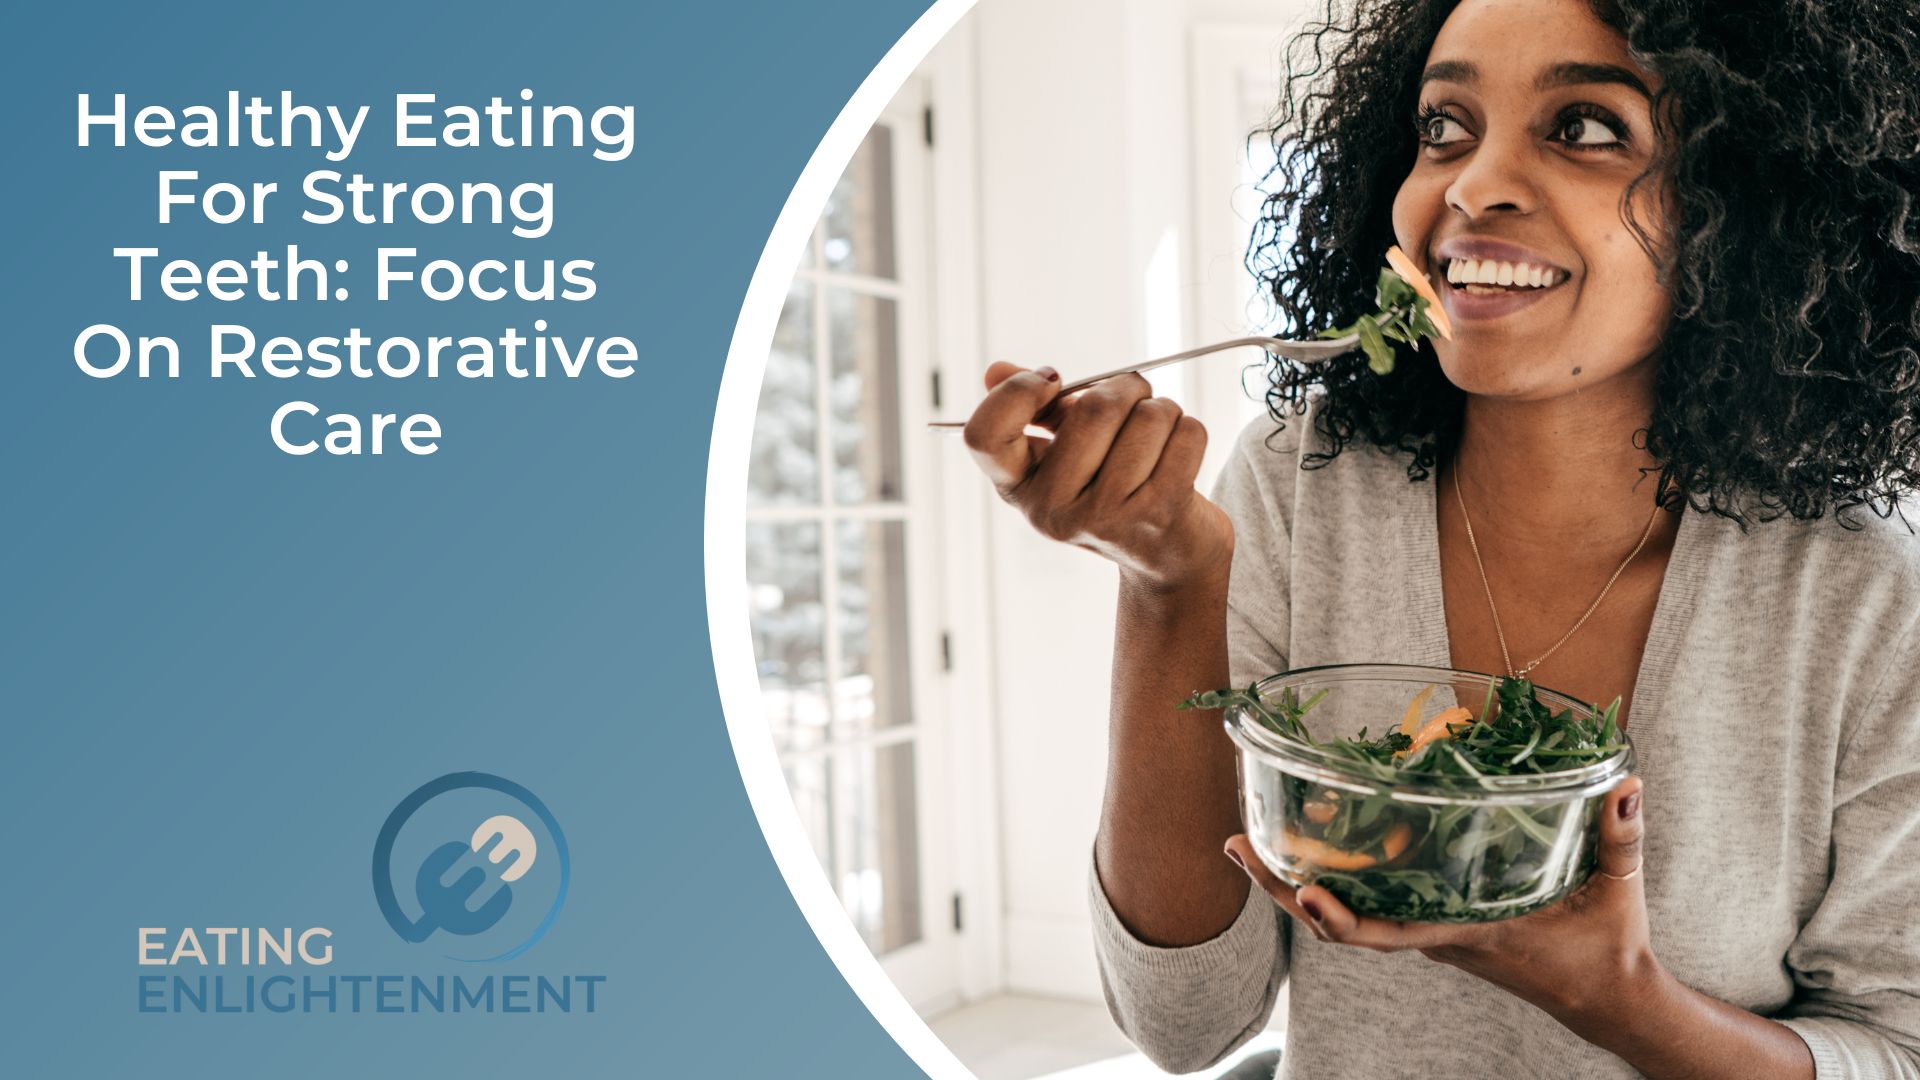 Healthy Eating For Strong Teeth: Focus On Restorative Care